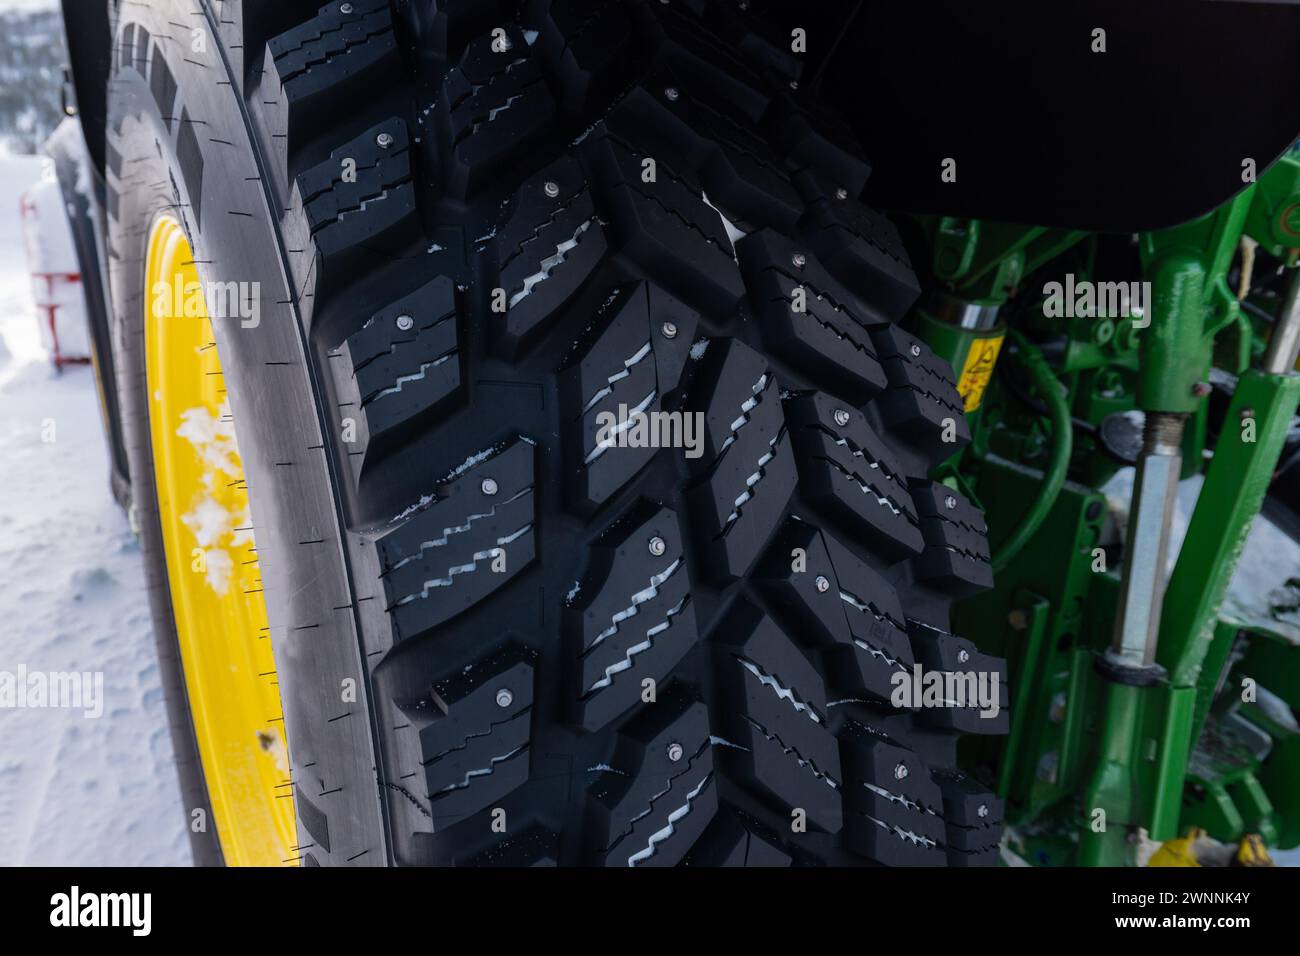 Tractor tire or tyre with deep profile and metal studs for safe winter driving on icy roads. Stock Photo